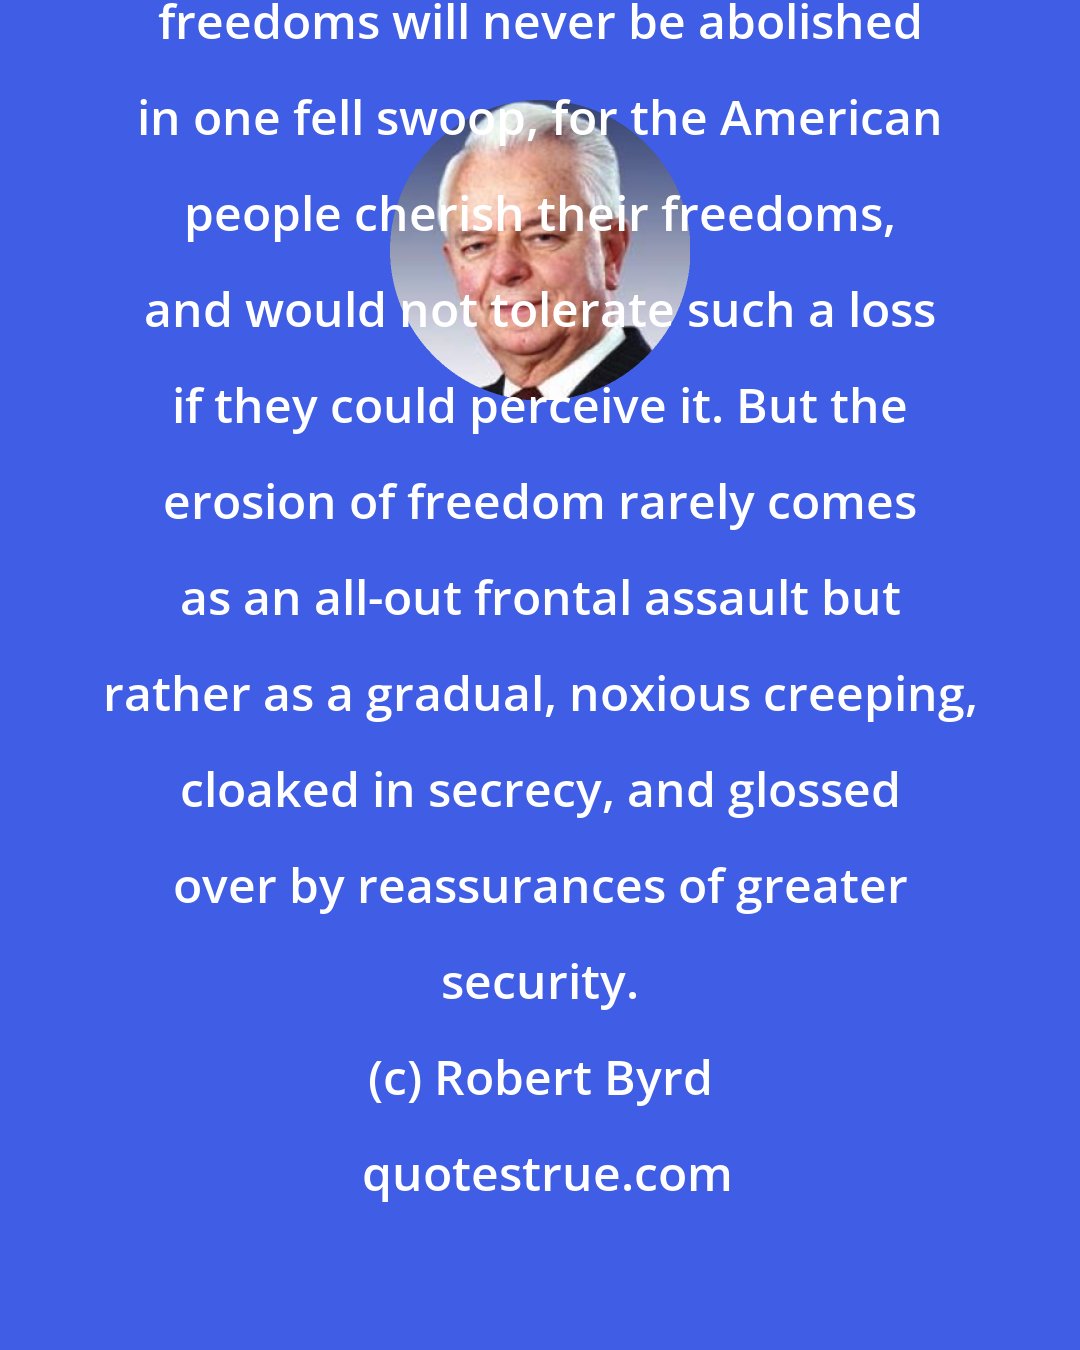 Robert Byrd: There is no doubt that constitutional freedoms will never be abolished in one fell swoop, for the American people cherish their freedoms, and would not tolerate such a loss if they could perceive it. But the erosion of freedom rarely comes as an all-out frontal assault but rather as a gradual, noxious creeping, cloaked in secrecy, and glossed over by reassurances of greater security.